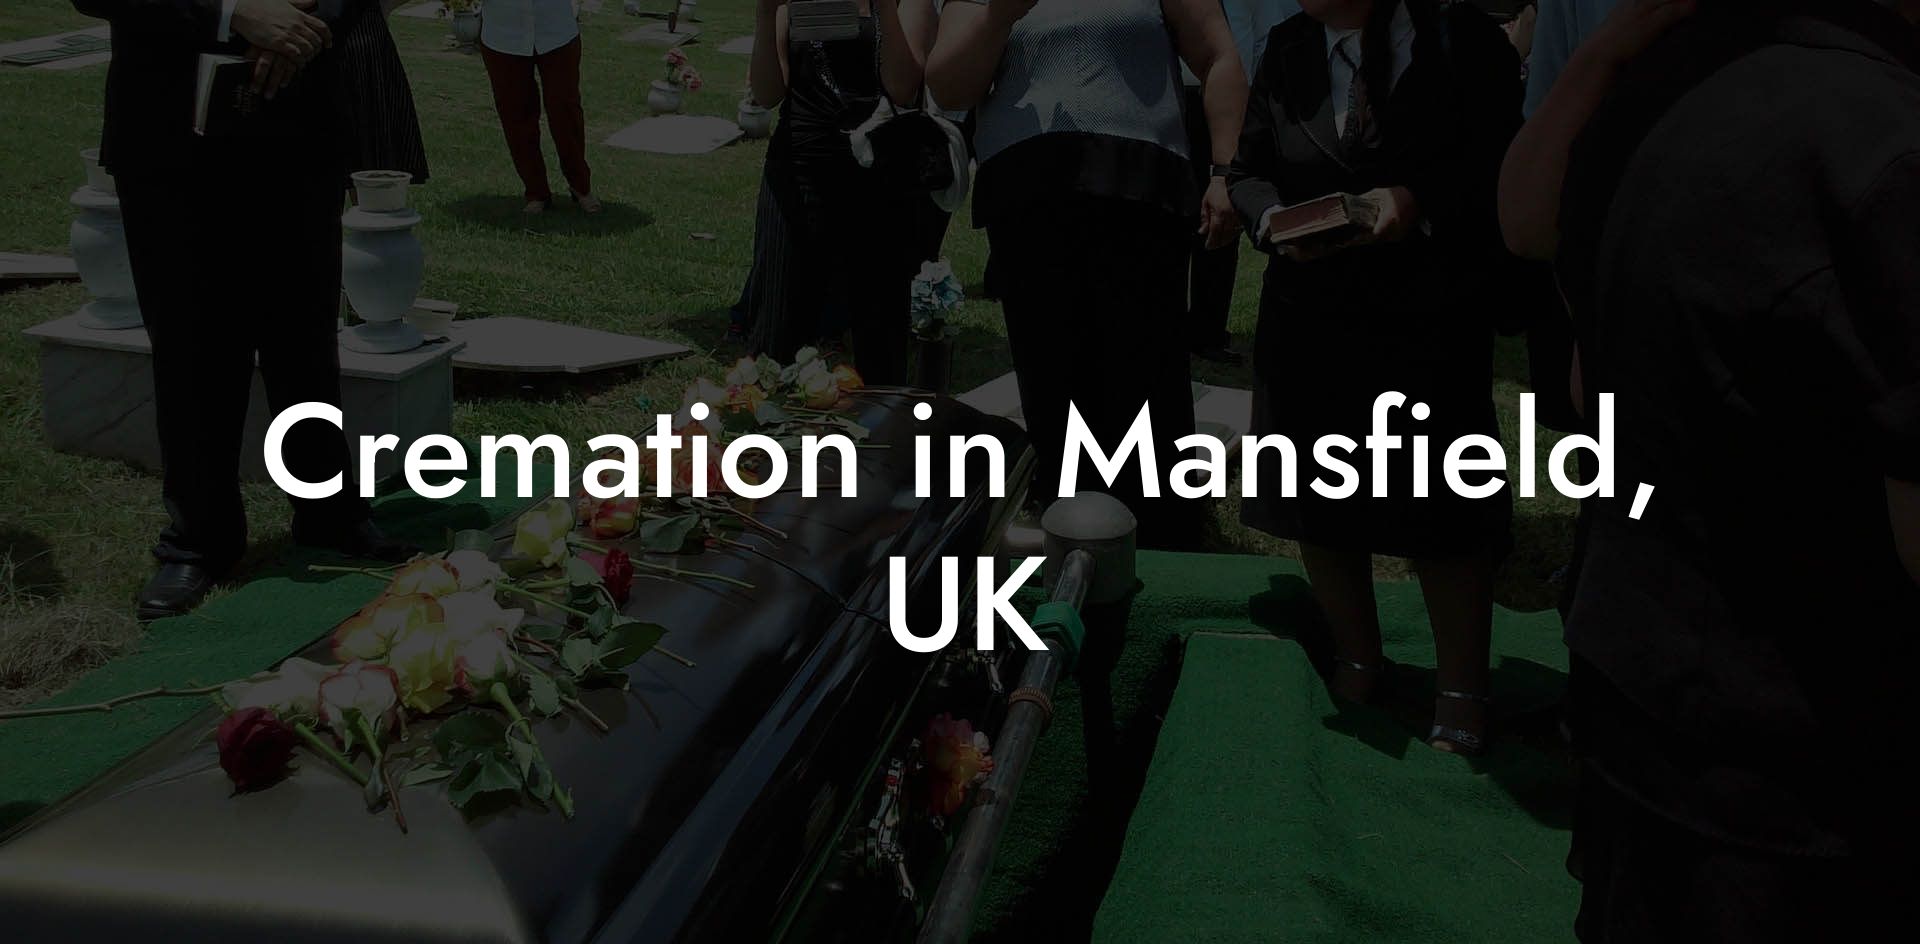 Cremation in Mansfield, UK